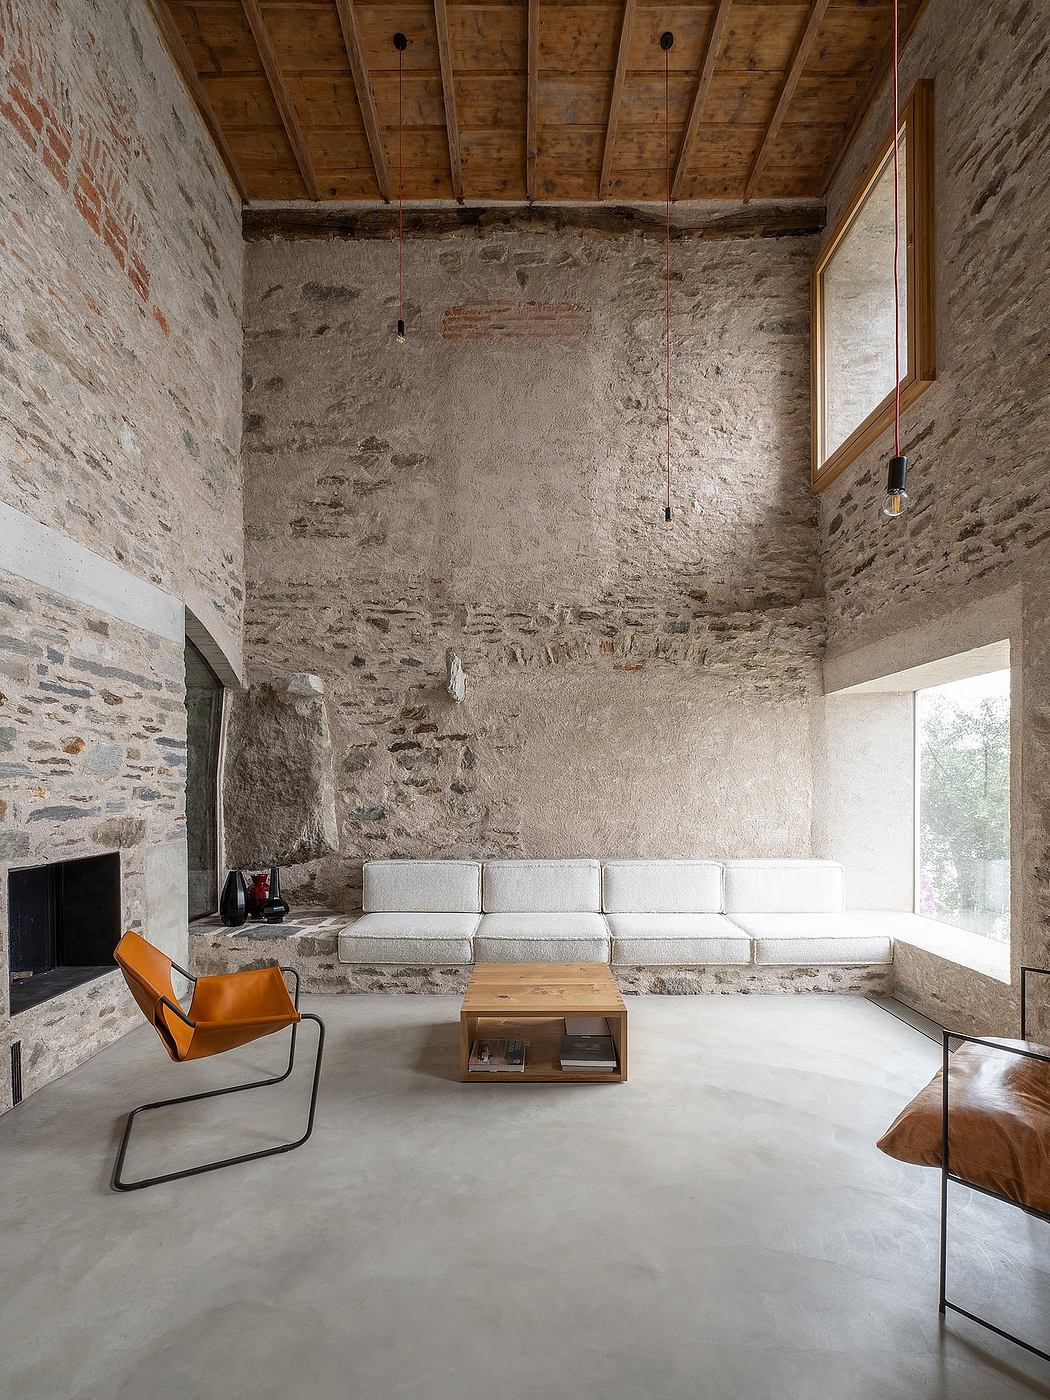 Contemporary room with exposed stone walls, wooden ceiling, and minimalistic furniture.